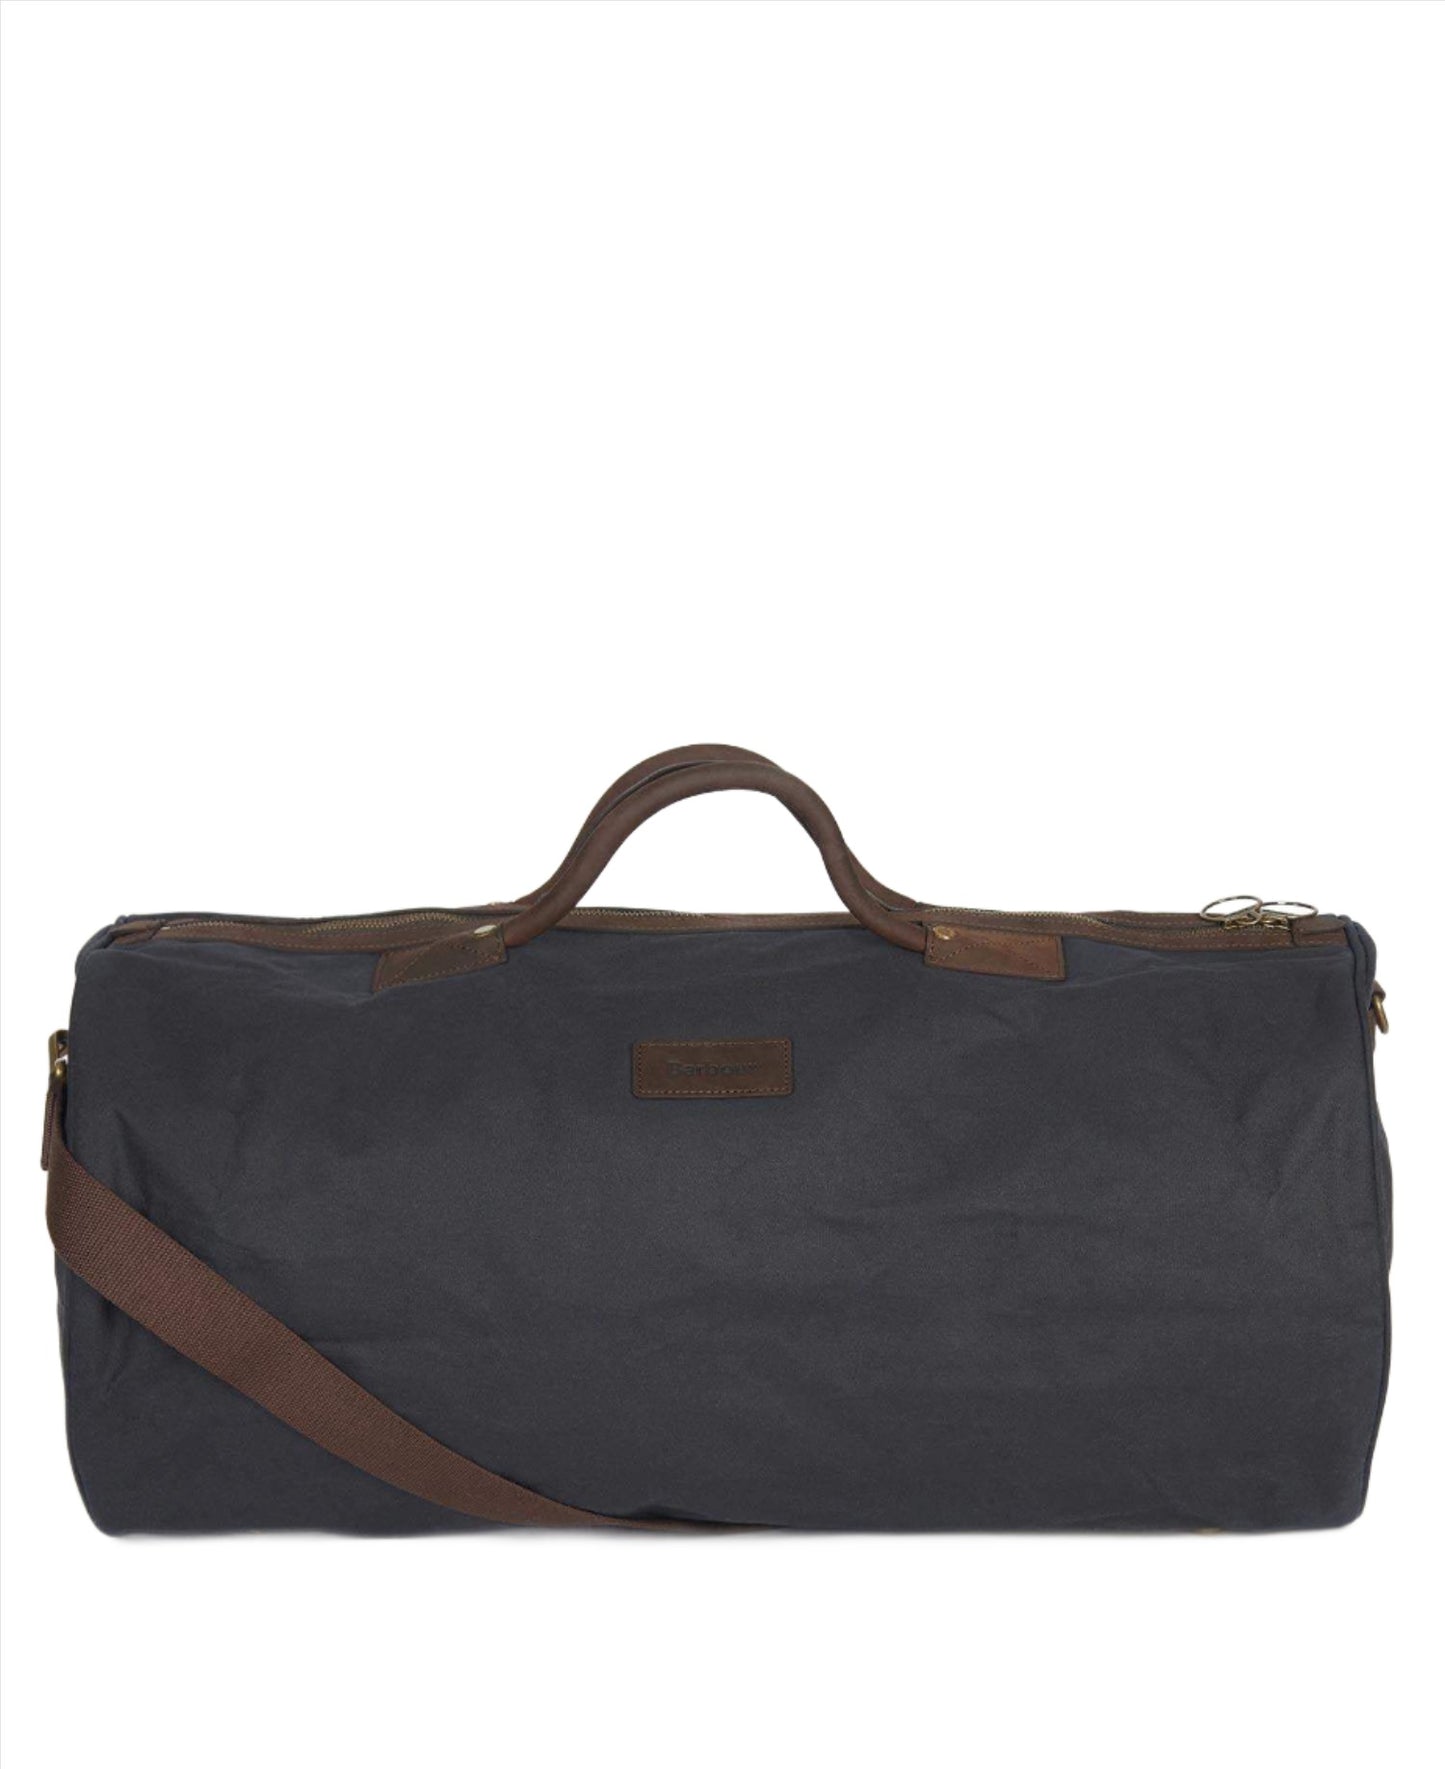 Barbour Wax Holdall - The Luxury Promotional Gifts Company Limited